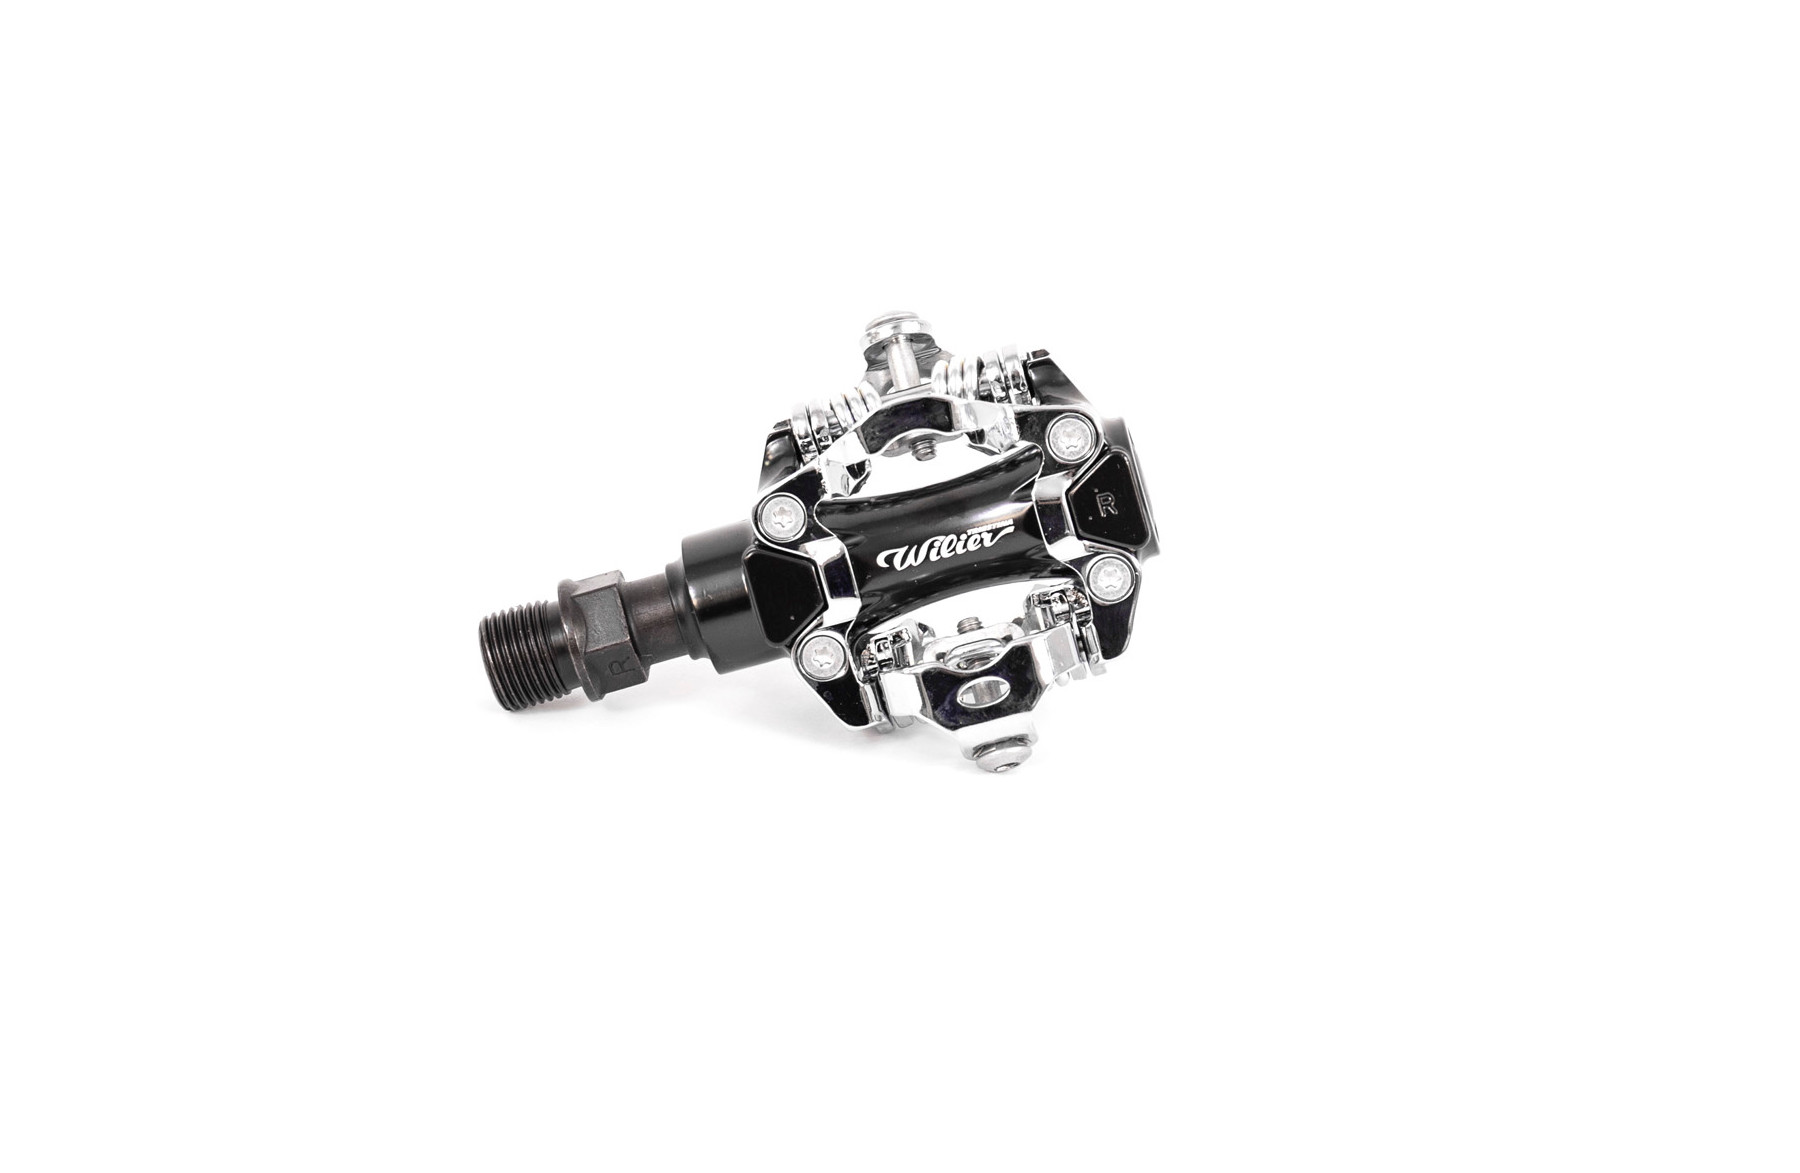 Mtb pedals sealed bearing